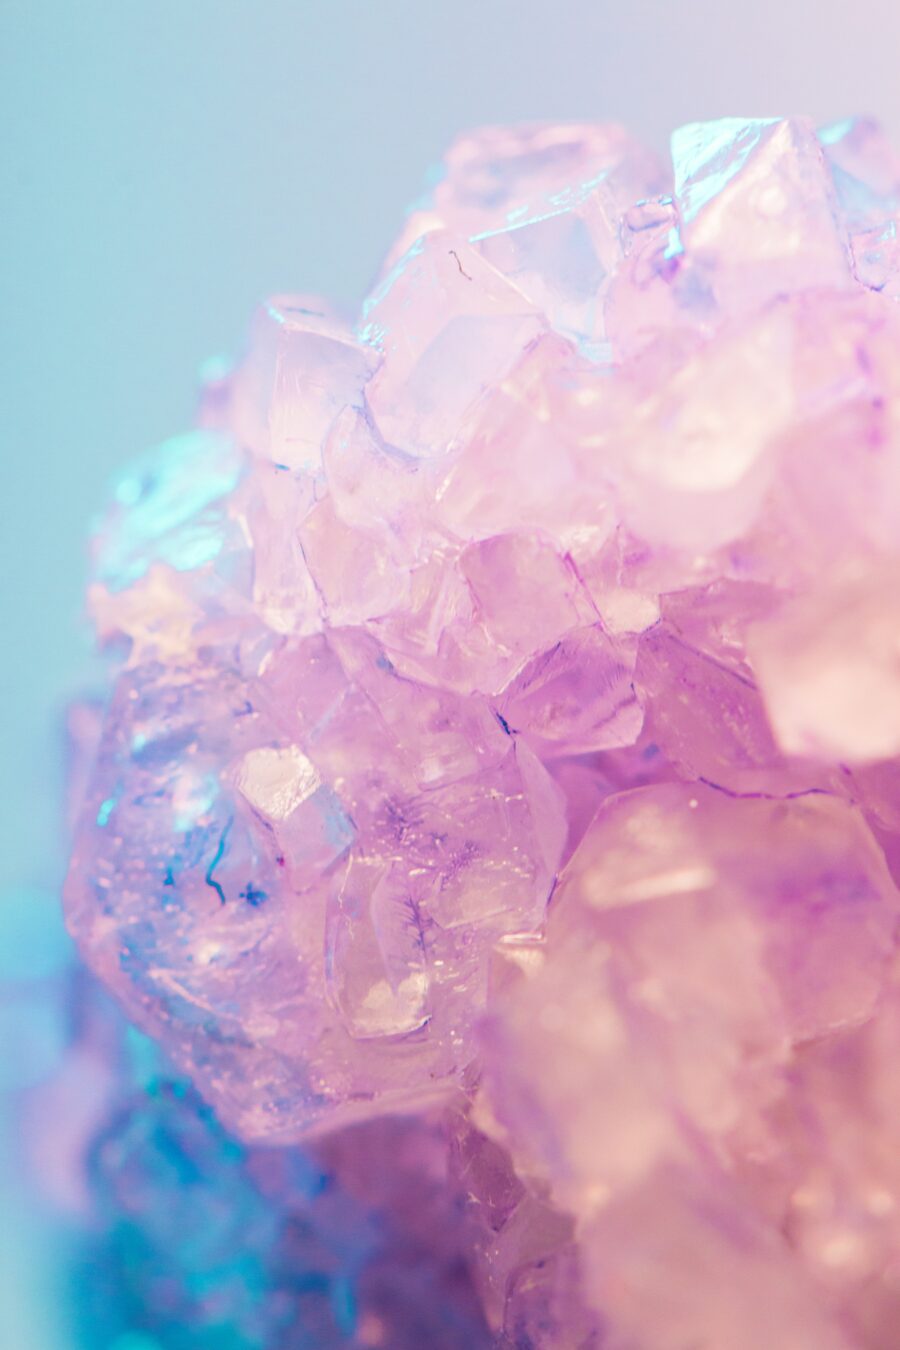 Healing Crystals Guide: What They Are and the Spiritual Meaning Behind Them